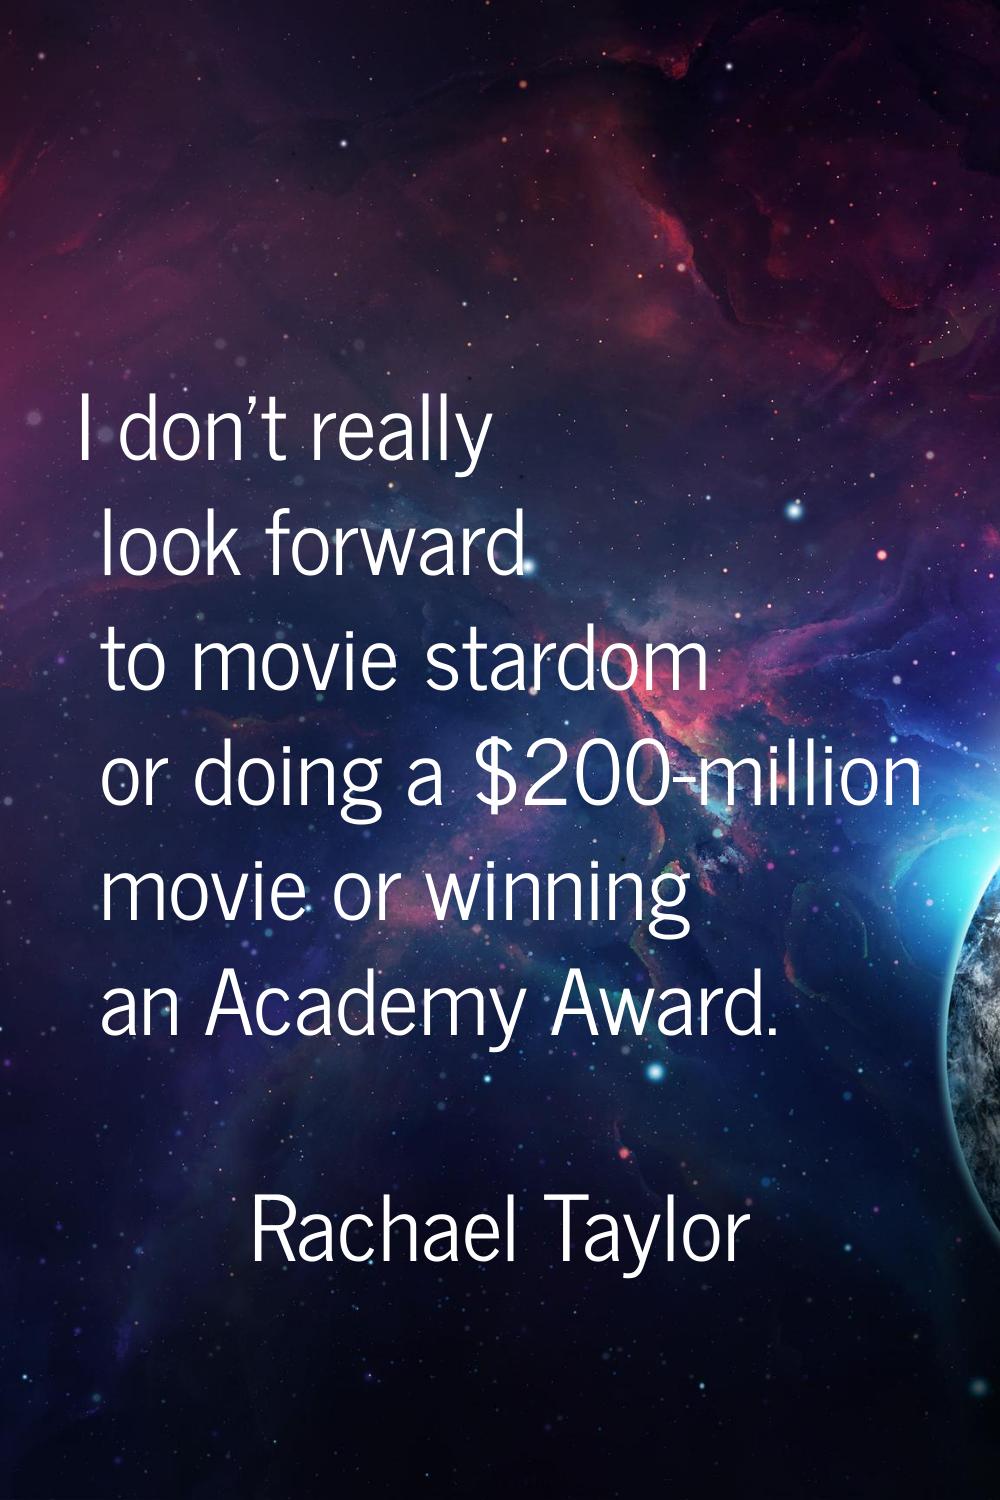 I don't really look forward to movie stardom or doing a $200-million movie or winning an Academy Aw